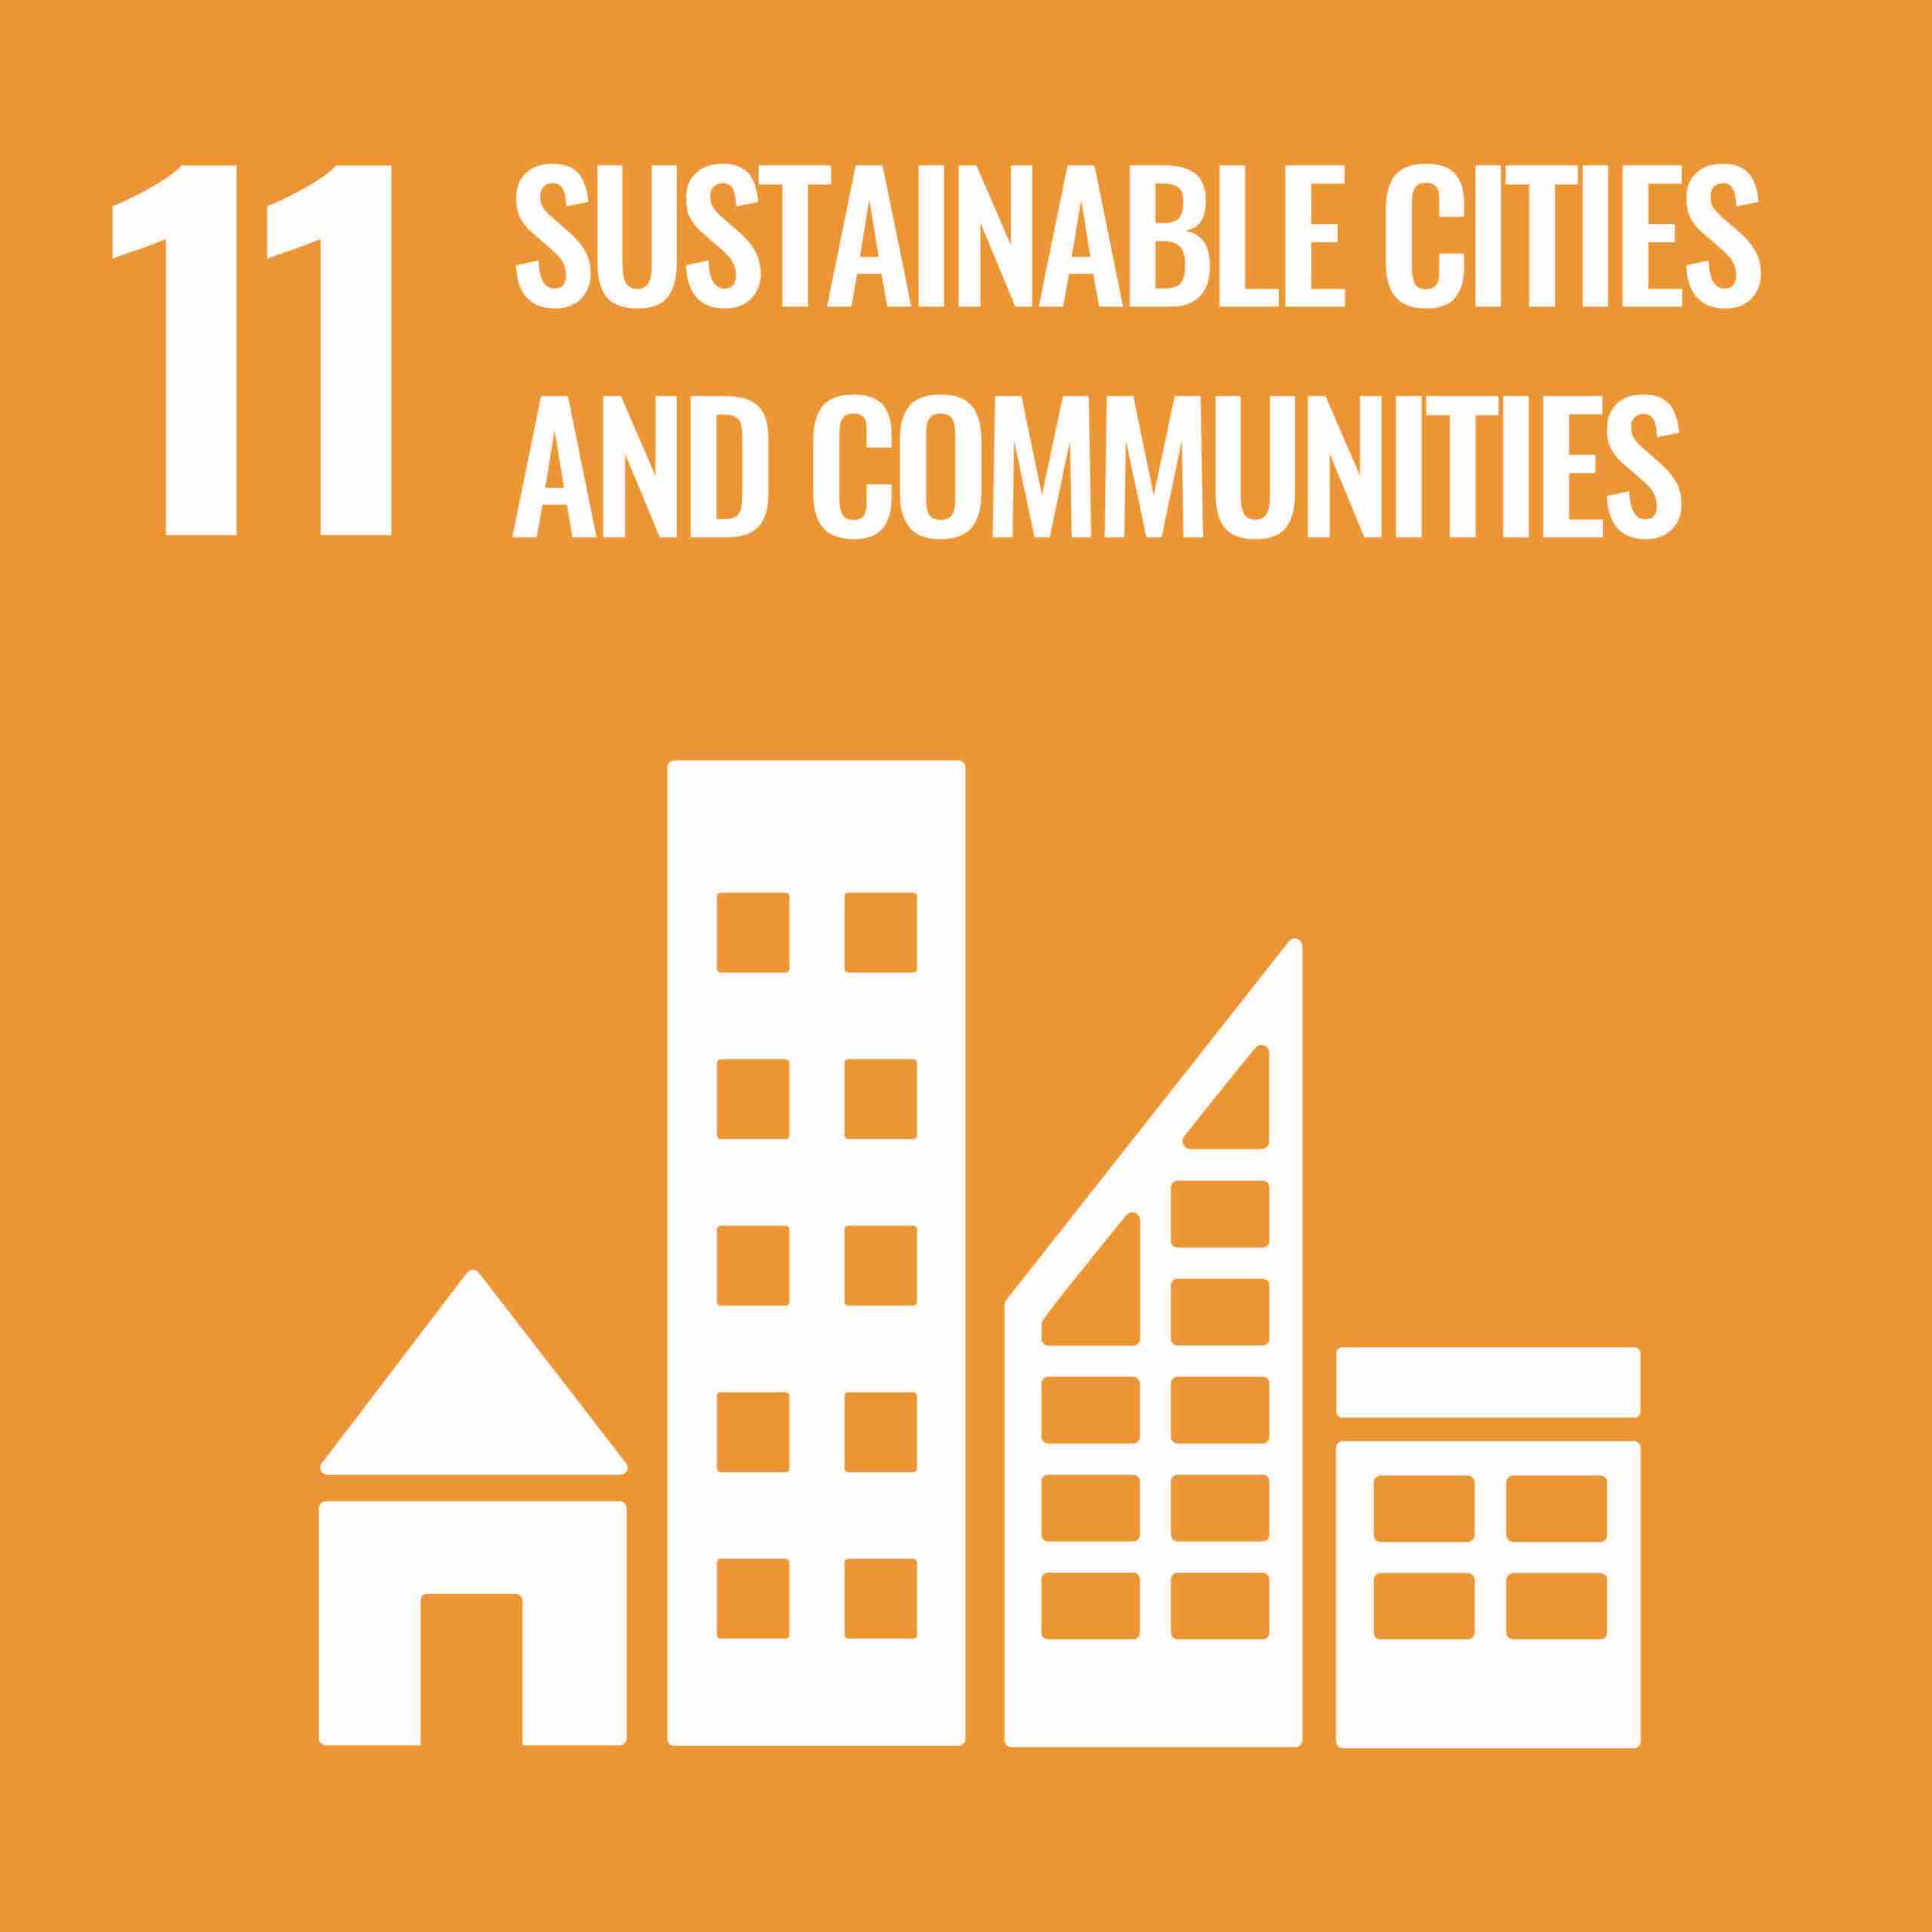 UN Goal 11 Sustainable Cities and Communities